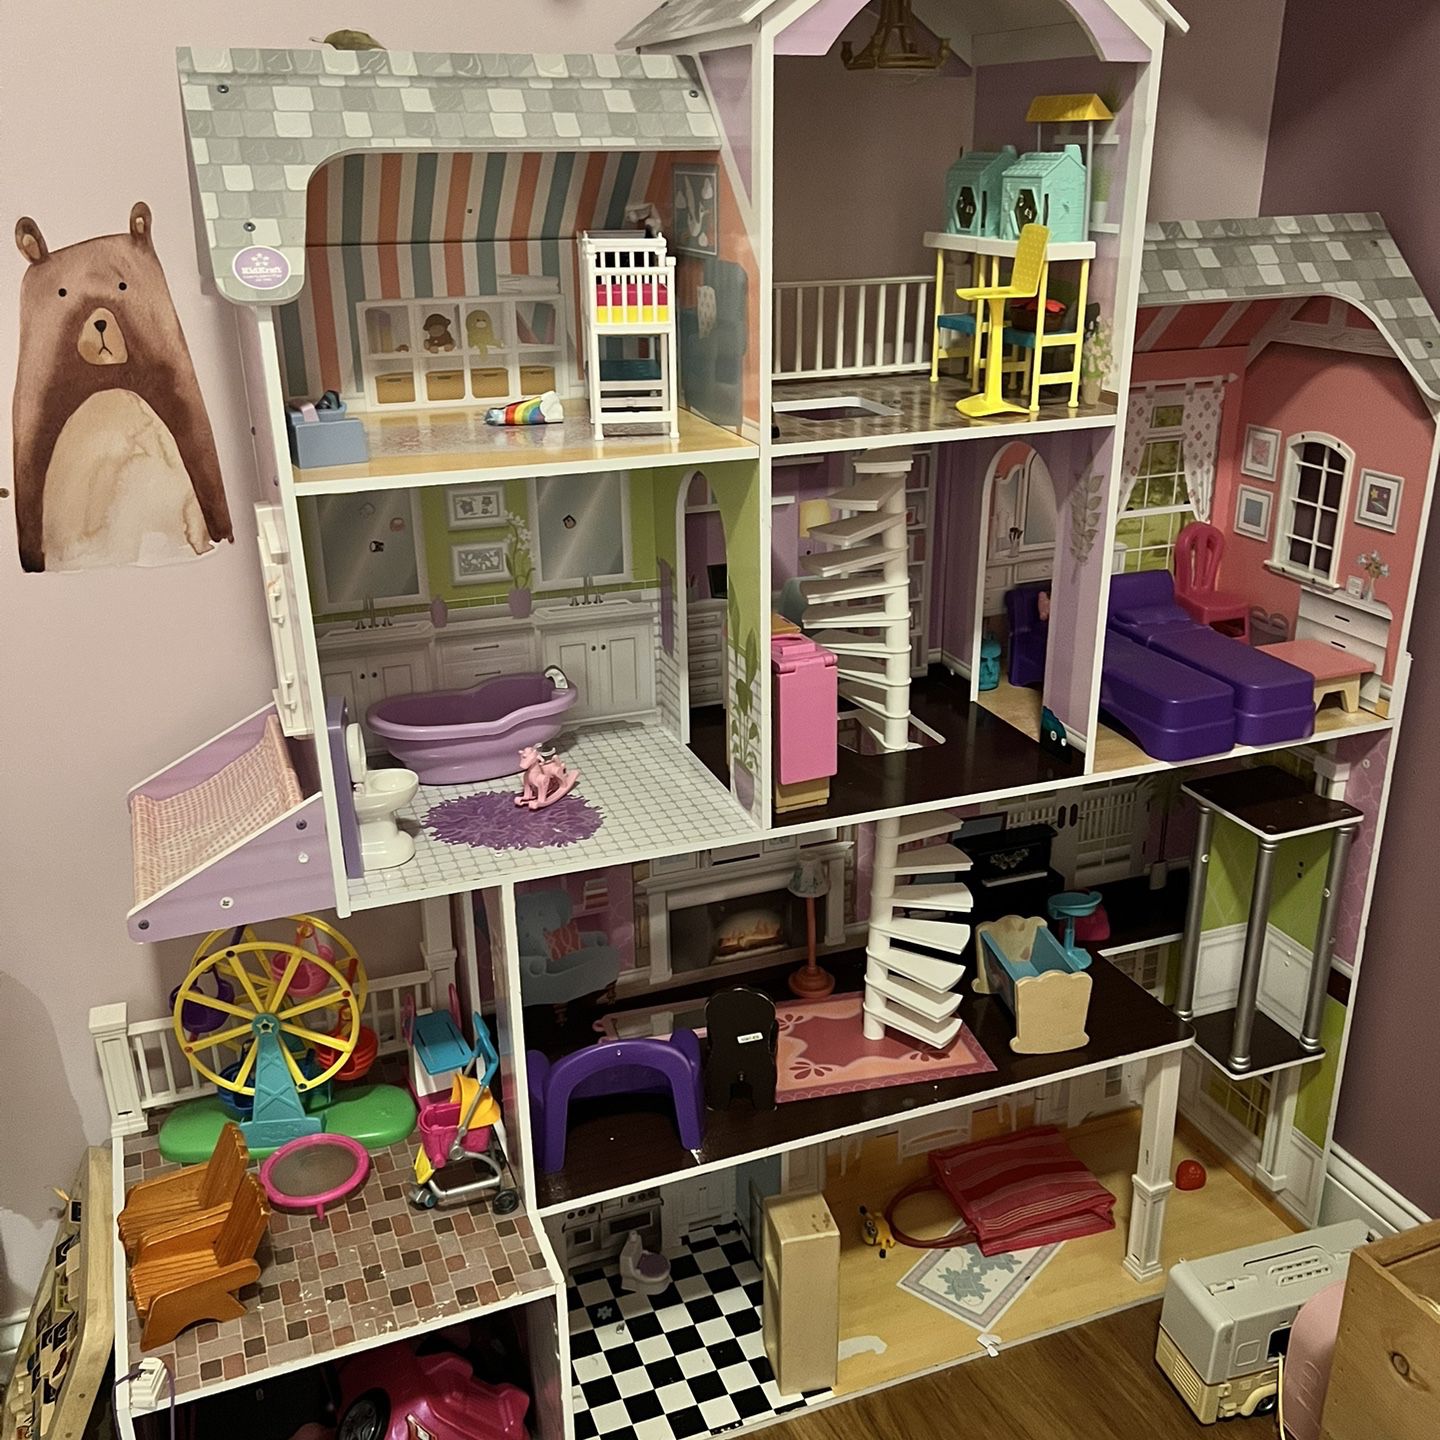 KidKraft Grand Estate Dollhouse for Sale in River Forest, IL - OfferUp